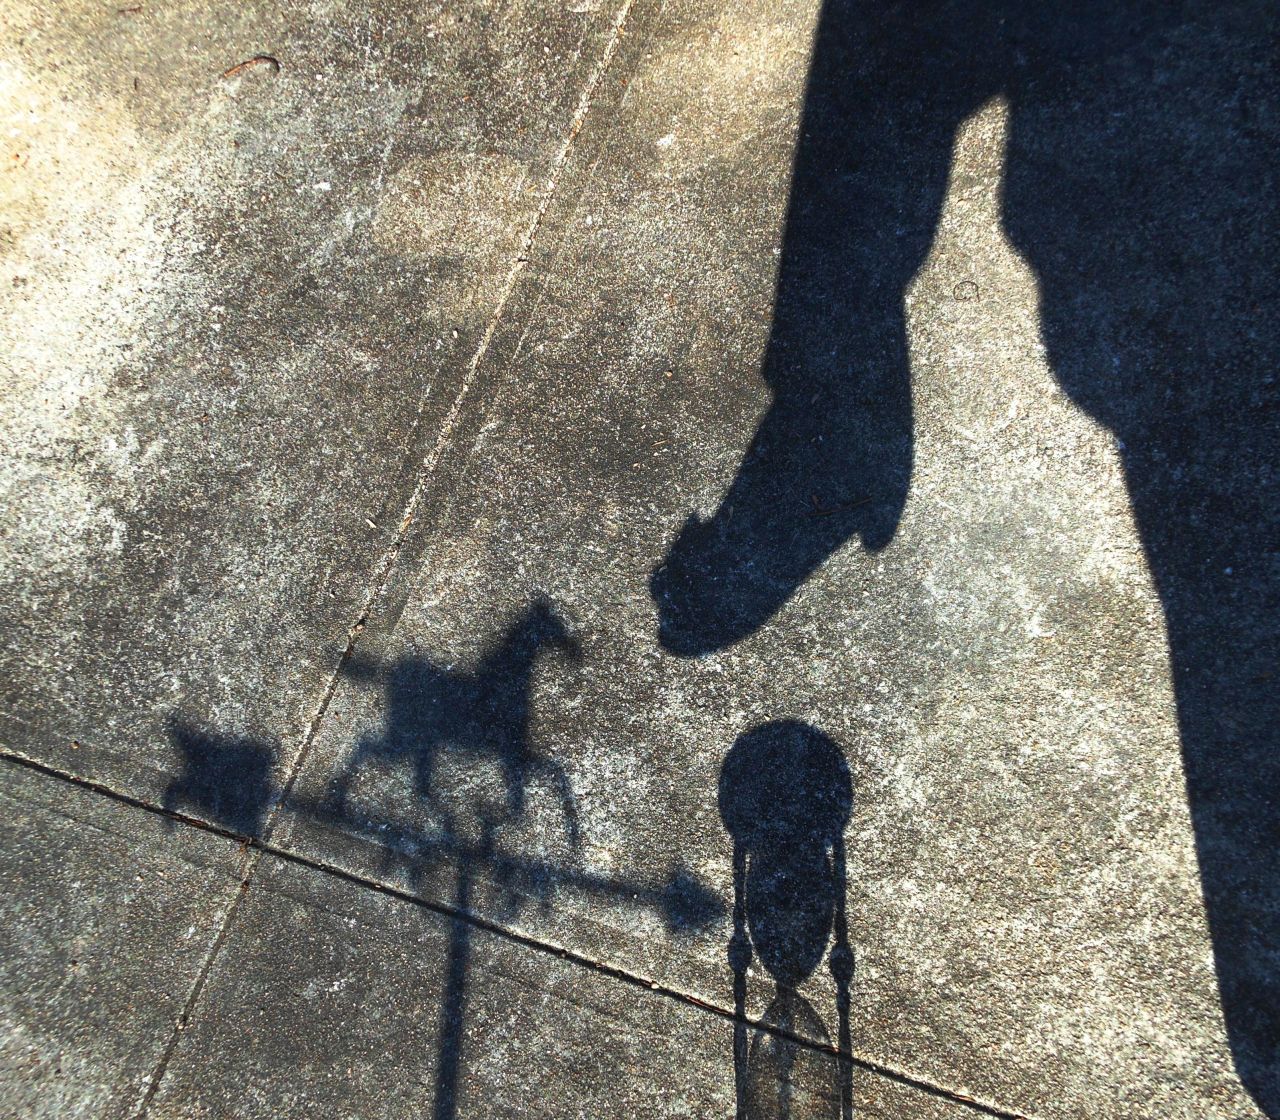 <a href="http://ireport.cnn.com/docs/DOC-919155" target="_blank">iReporter Natalie Montanaro</a> shot this photo of her shadow along with a horse weather vane and hourglass. "I was thinking about the "Wizard of Oz" when I spotted the hourglass near the fireplace so I put on my dancing shoes to set up a shot," she said. "I so wish that there will be an early spring." 